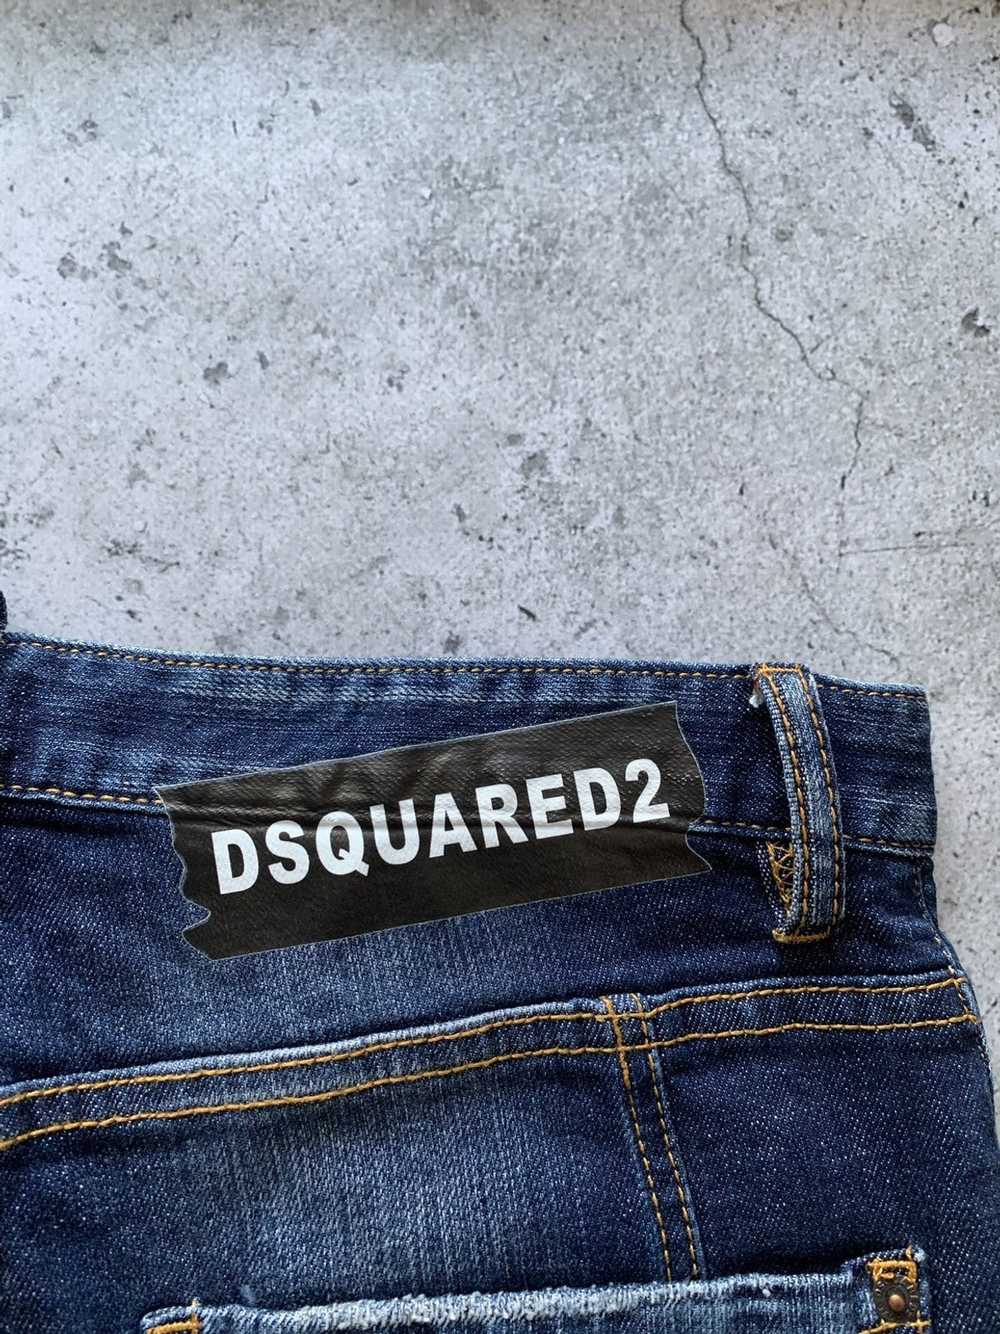 Dsquared2 Dsquared2 cool guy jeans - image 10